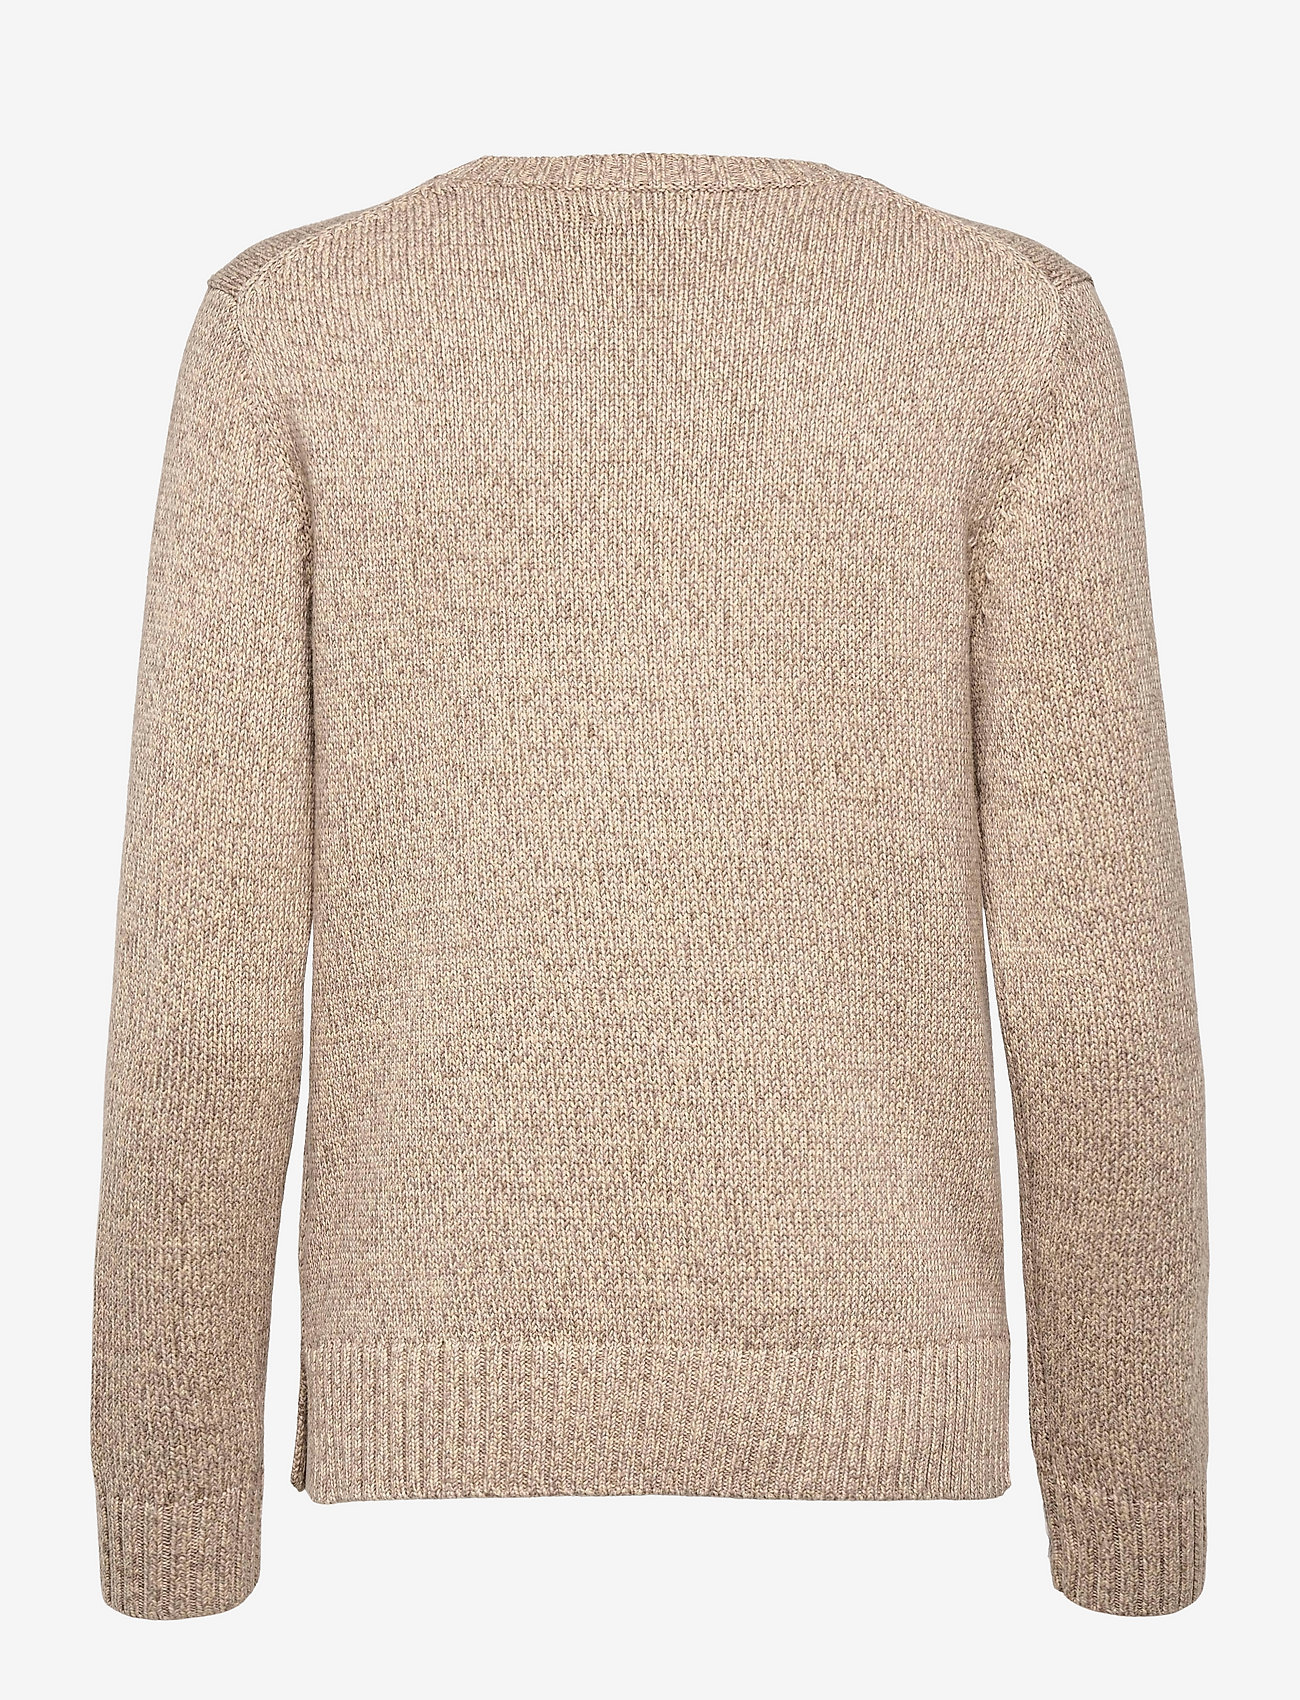 Polo Ralph Lauren - Shearling Polo Bear Wool-Blend Sweater - taupe multi - 1